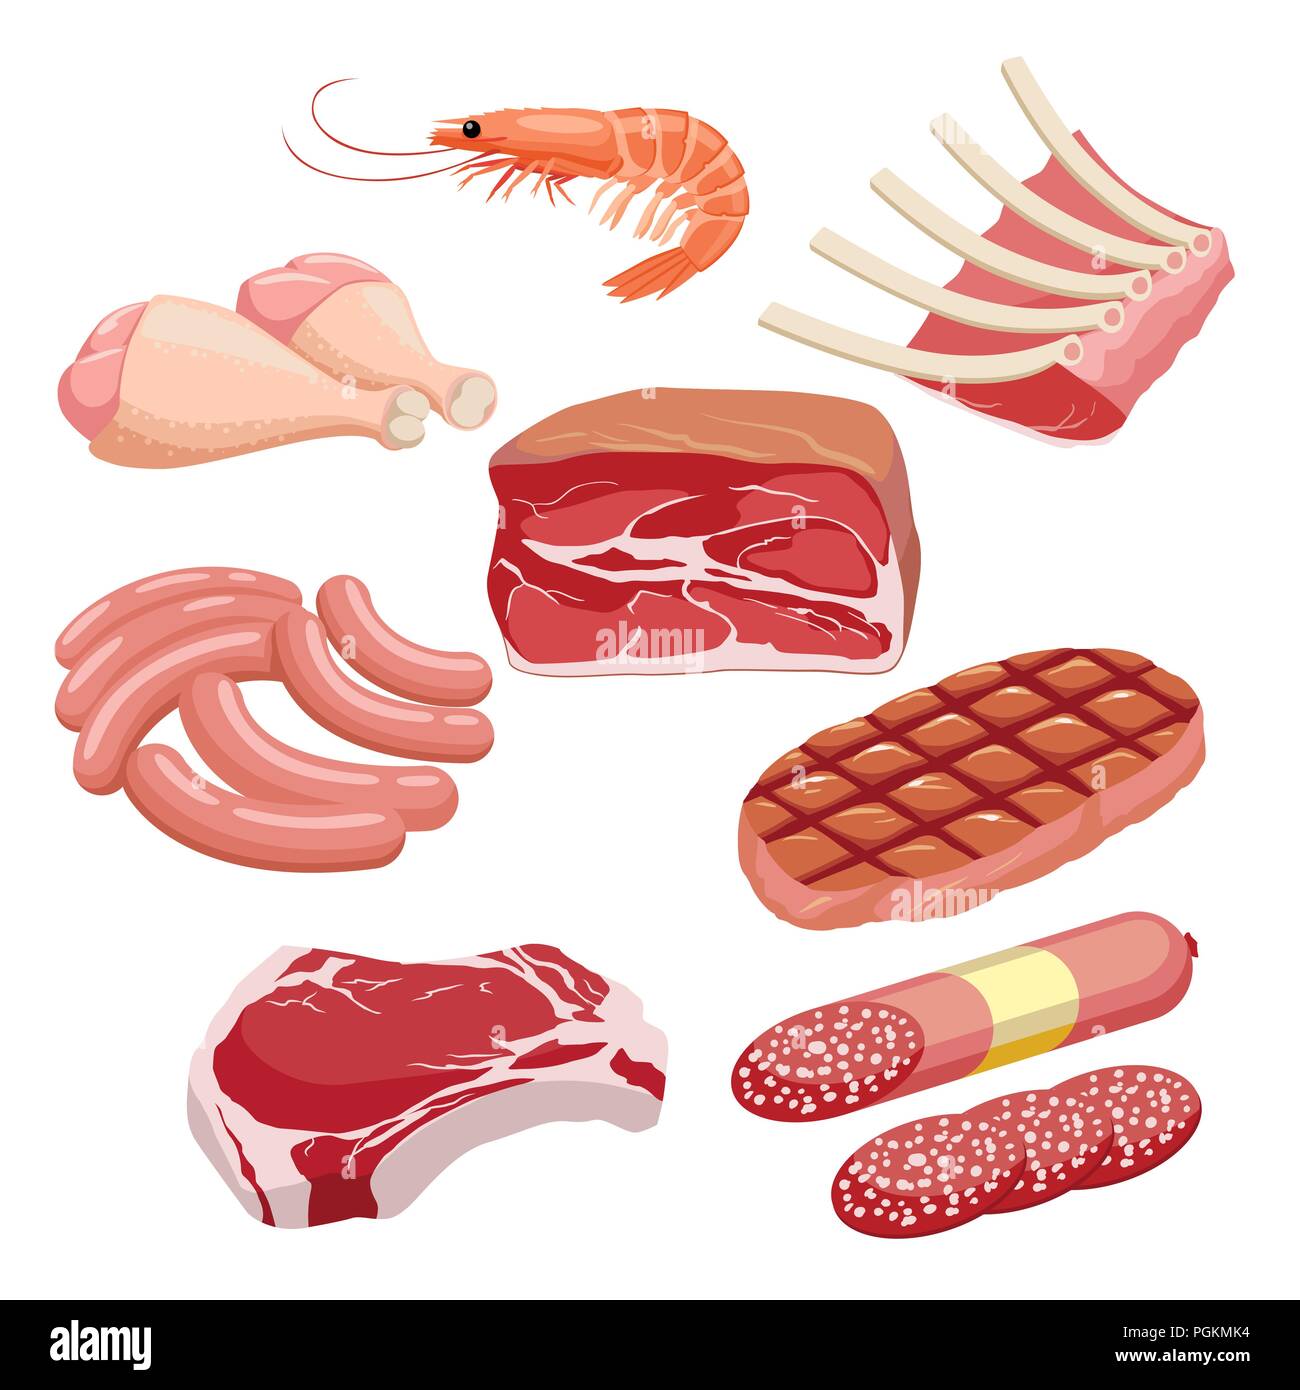 Meat icon set vector Fresh and grilled meat icons set. Steak, shrimp, chicken leg, sausages, ribs, pork and beef isolated on white background. Stock Vector